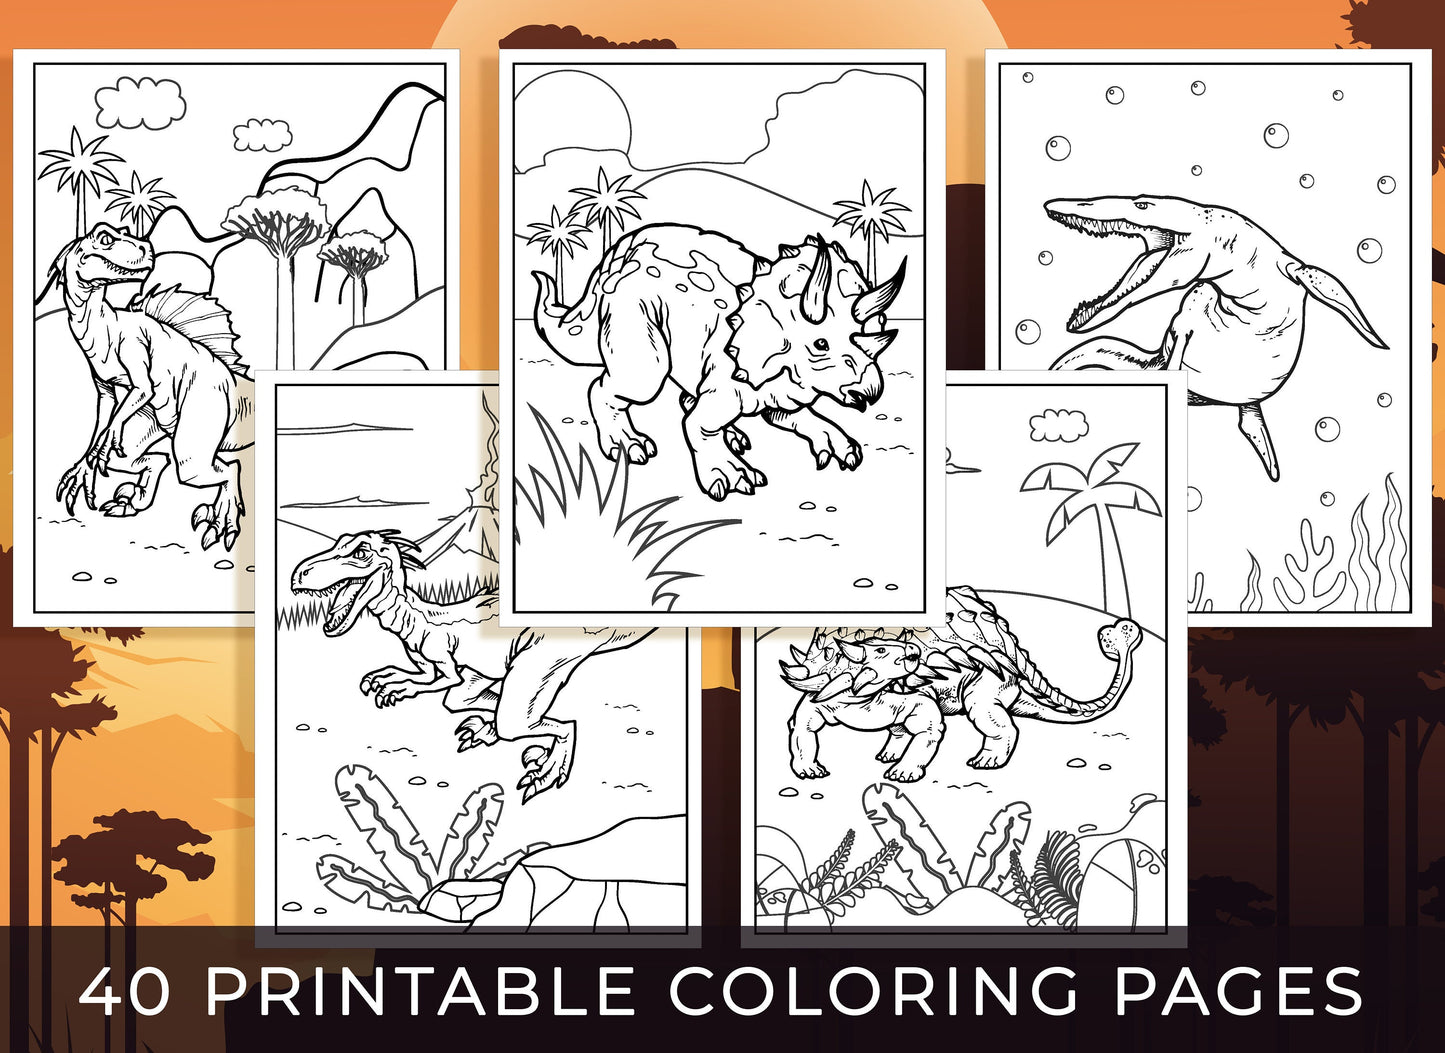 Dinosaur Coloring Pages - 40 Printable Dinosaur Coloring Pages for Boys, Teens & Kids, Dinosaur Birthday Party Activity, Boys Birthday Party